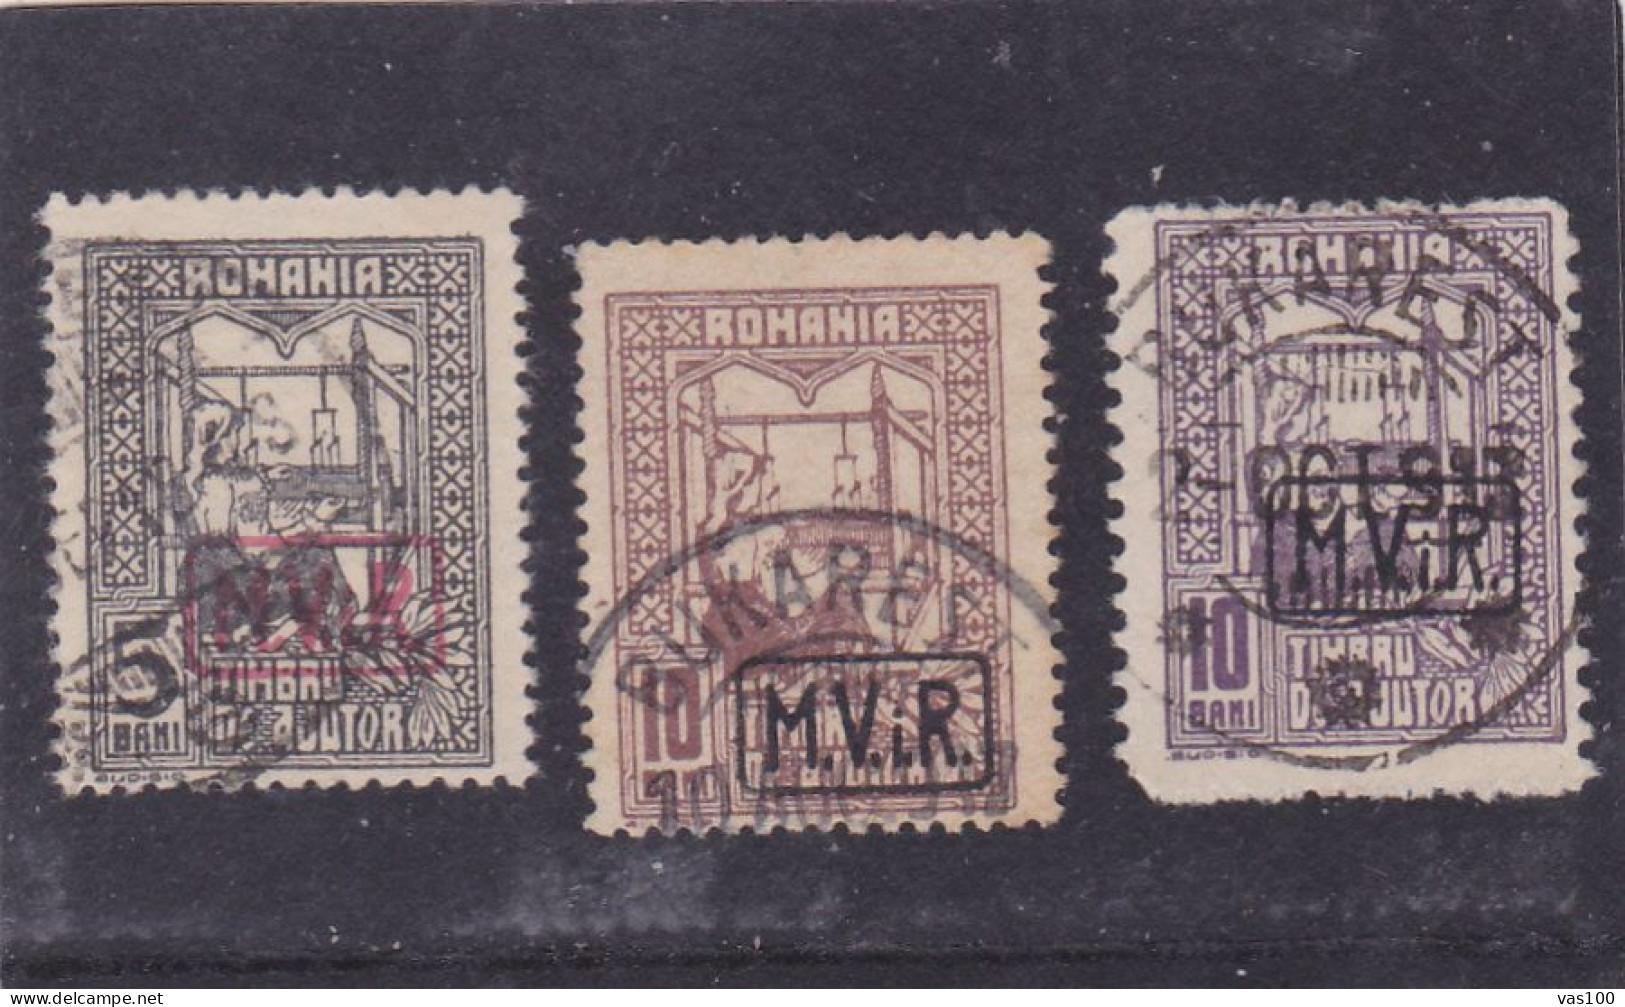 Germany WW1 Occupation In Romania 1917 MViR  3 STAMPS POSTAGE DUE USED - Occupations